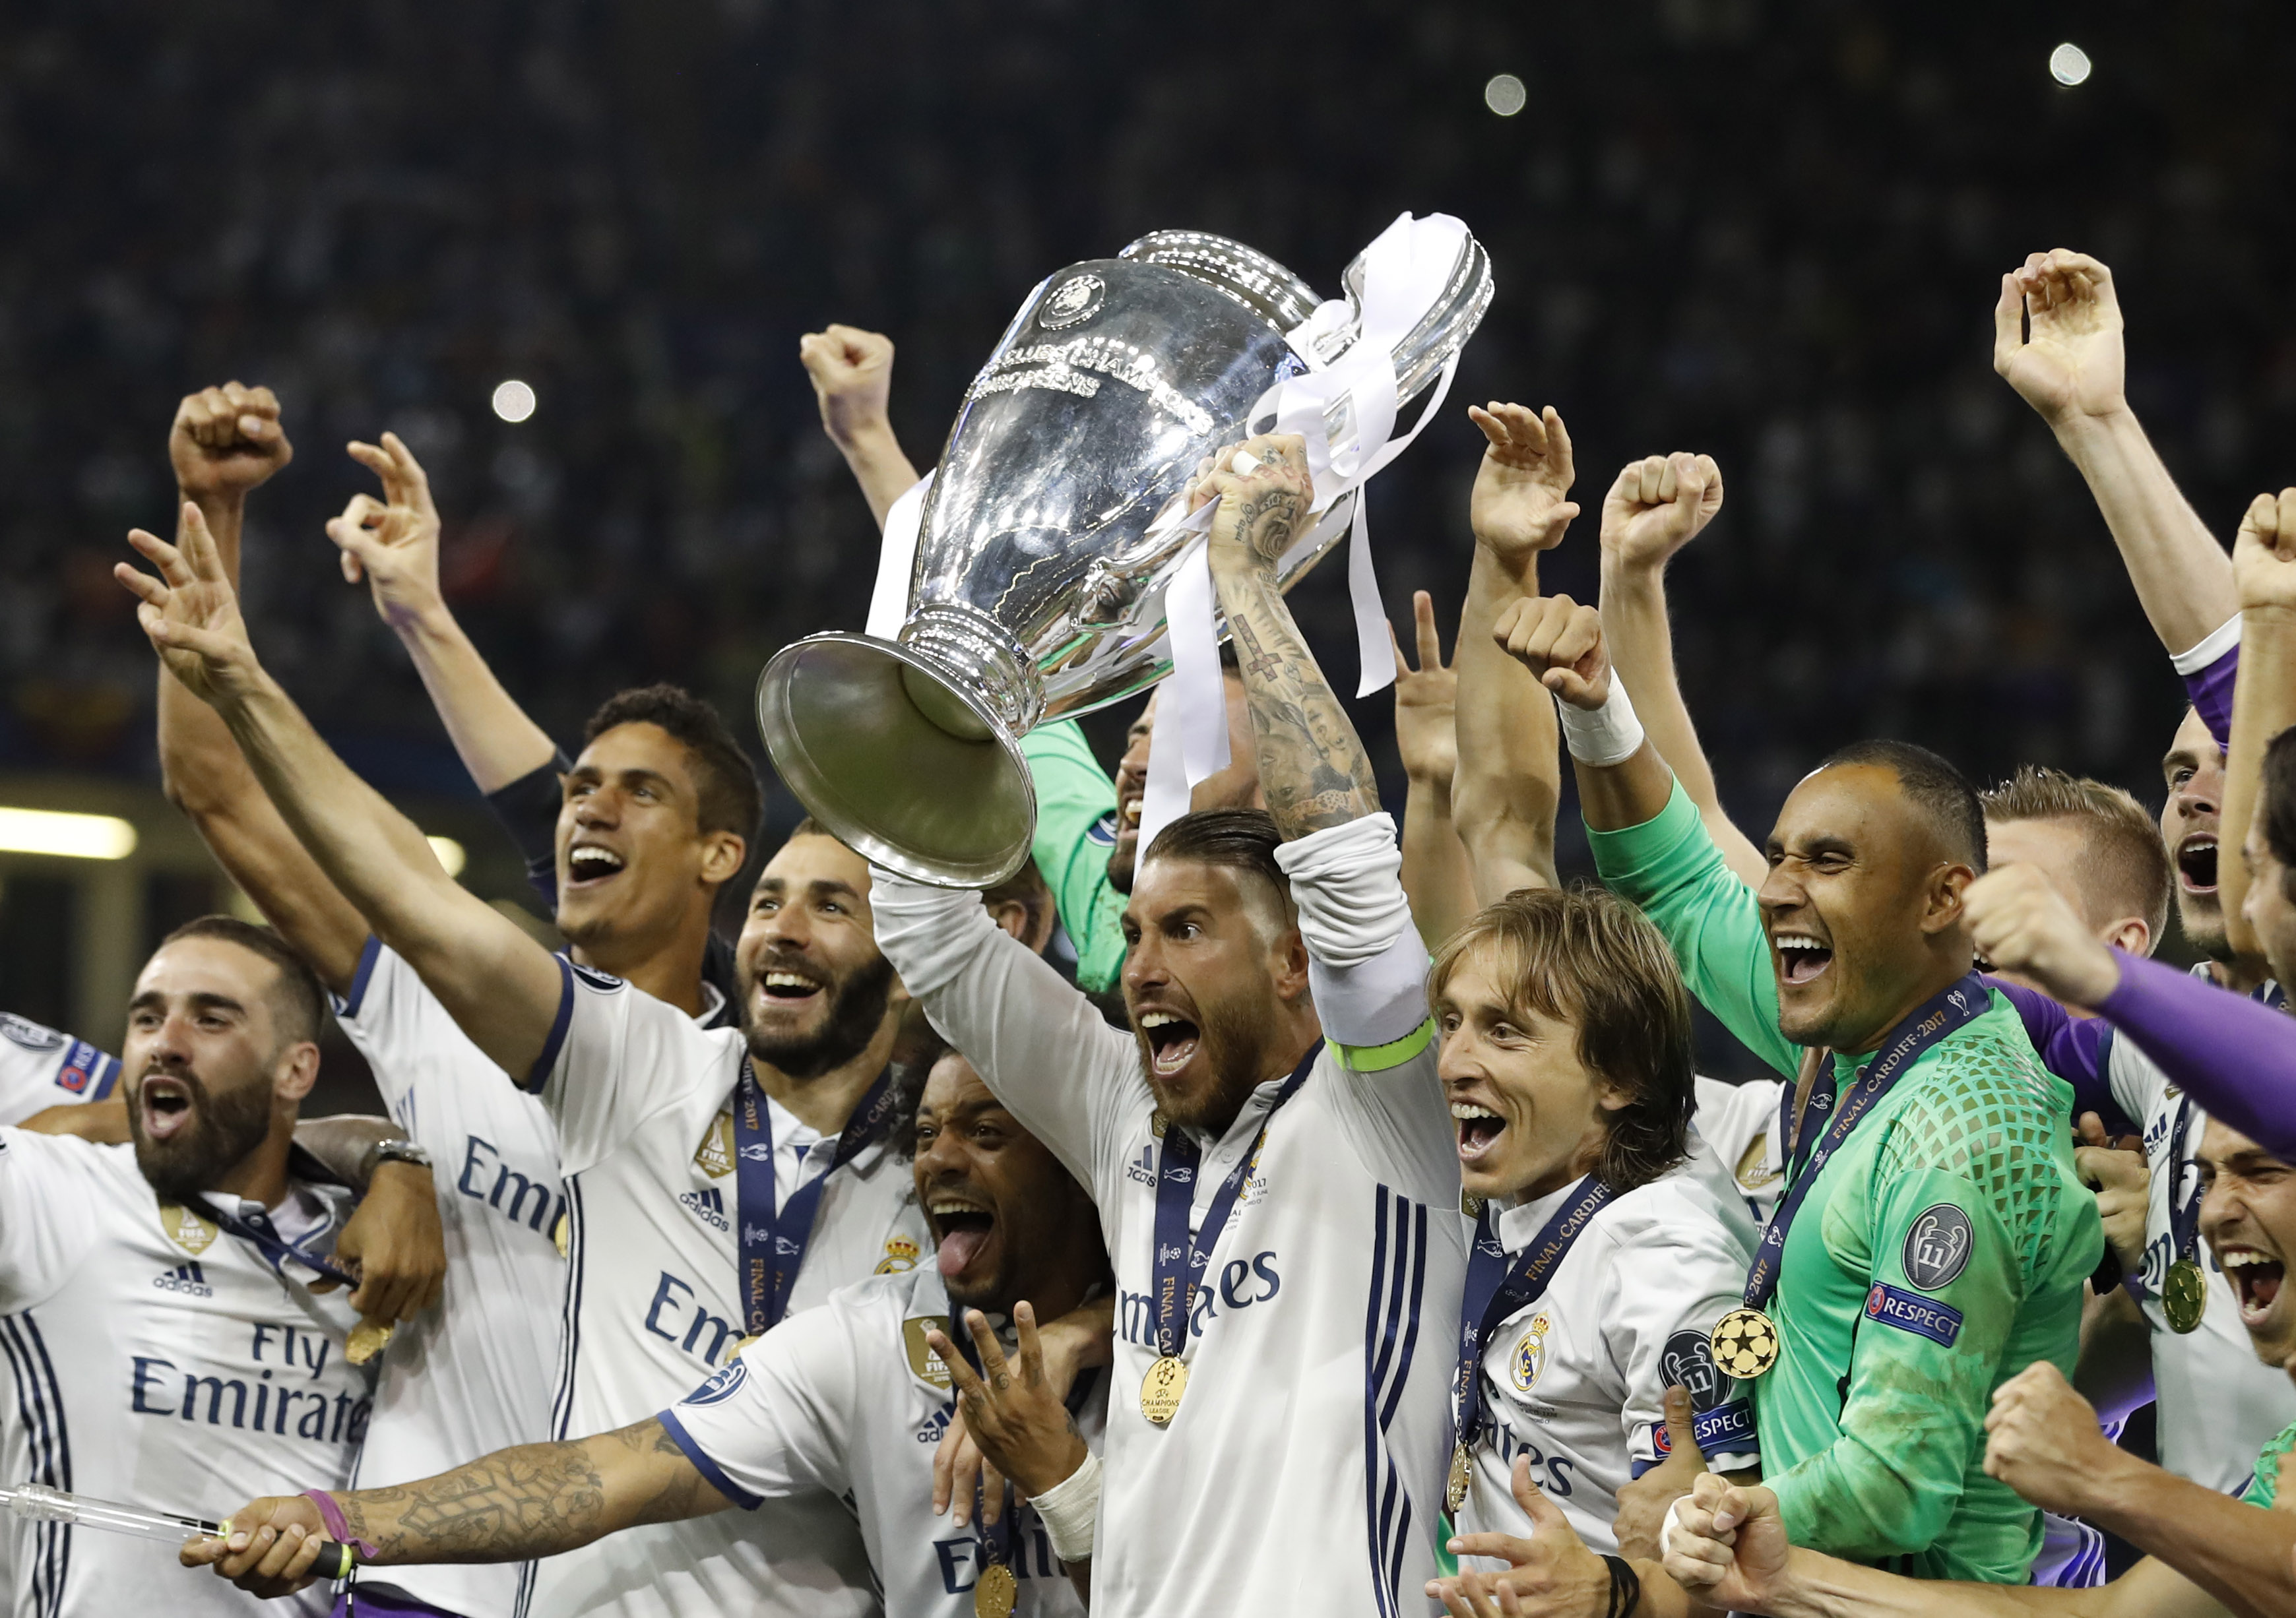 Real Madrid's Sergio Ramos celebrates with the trophy after winning the UEFA Champions League Final